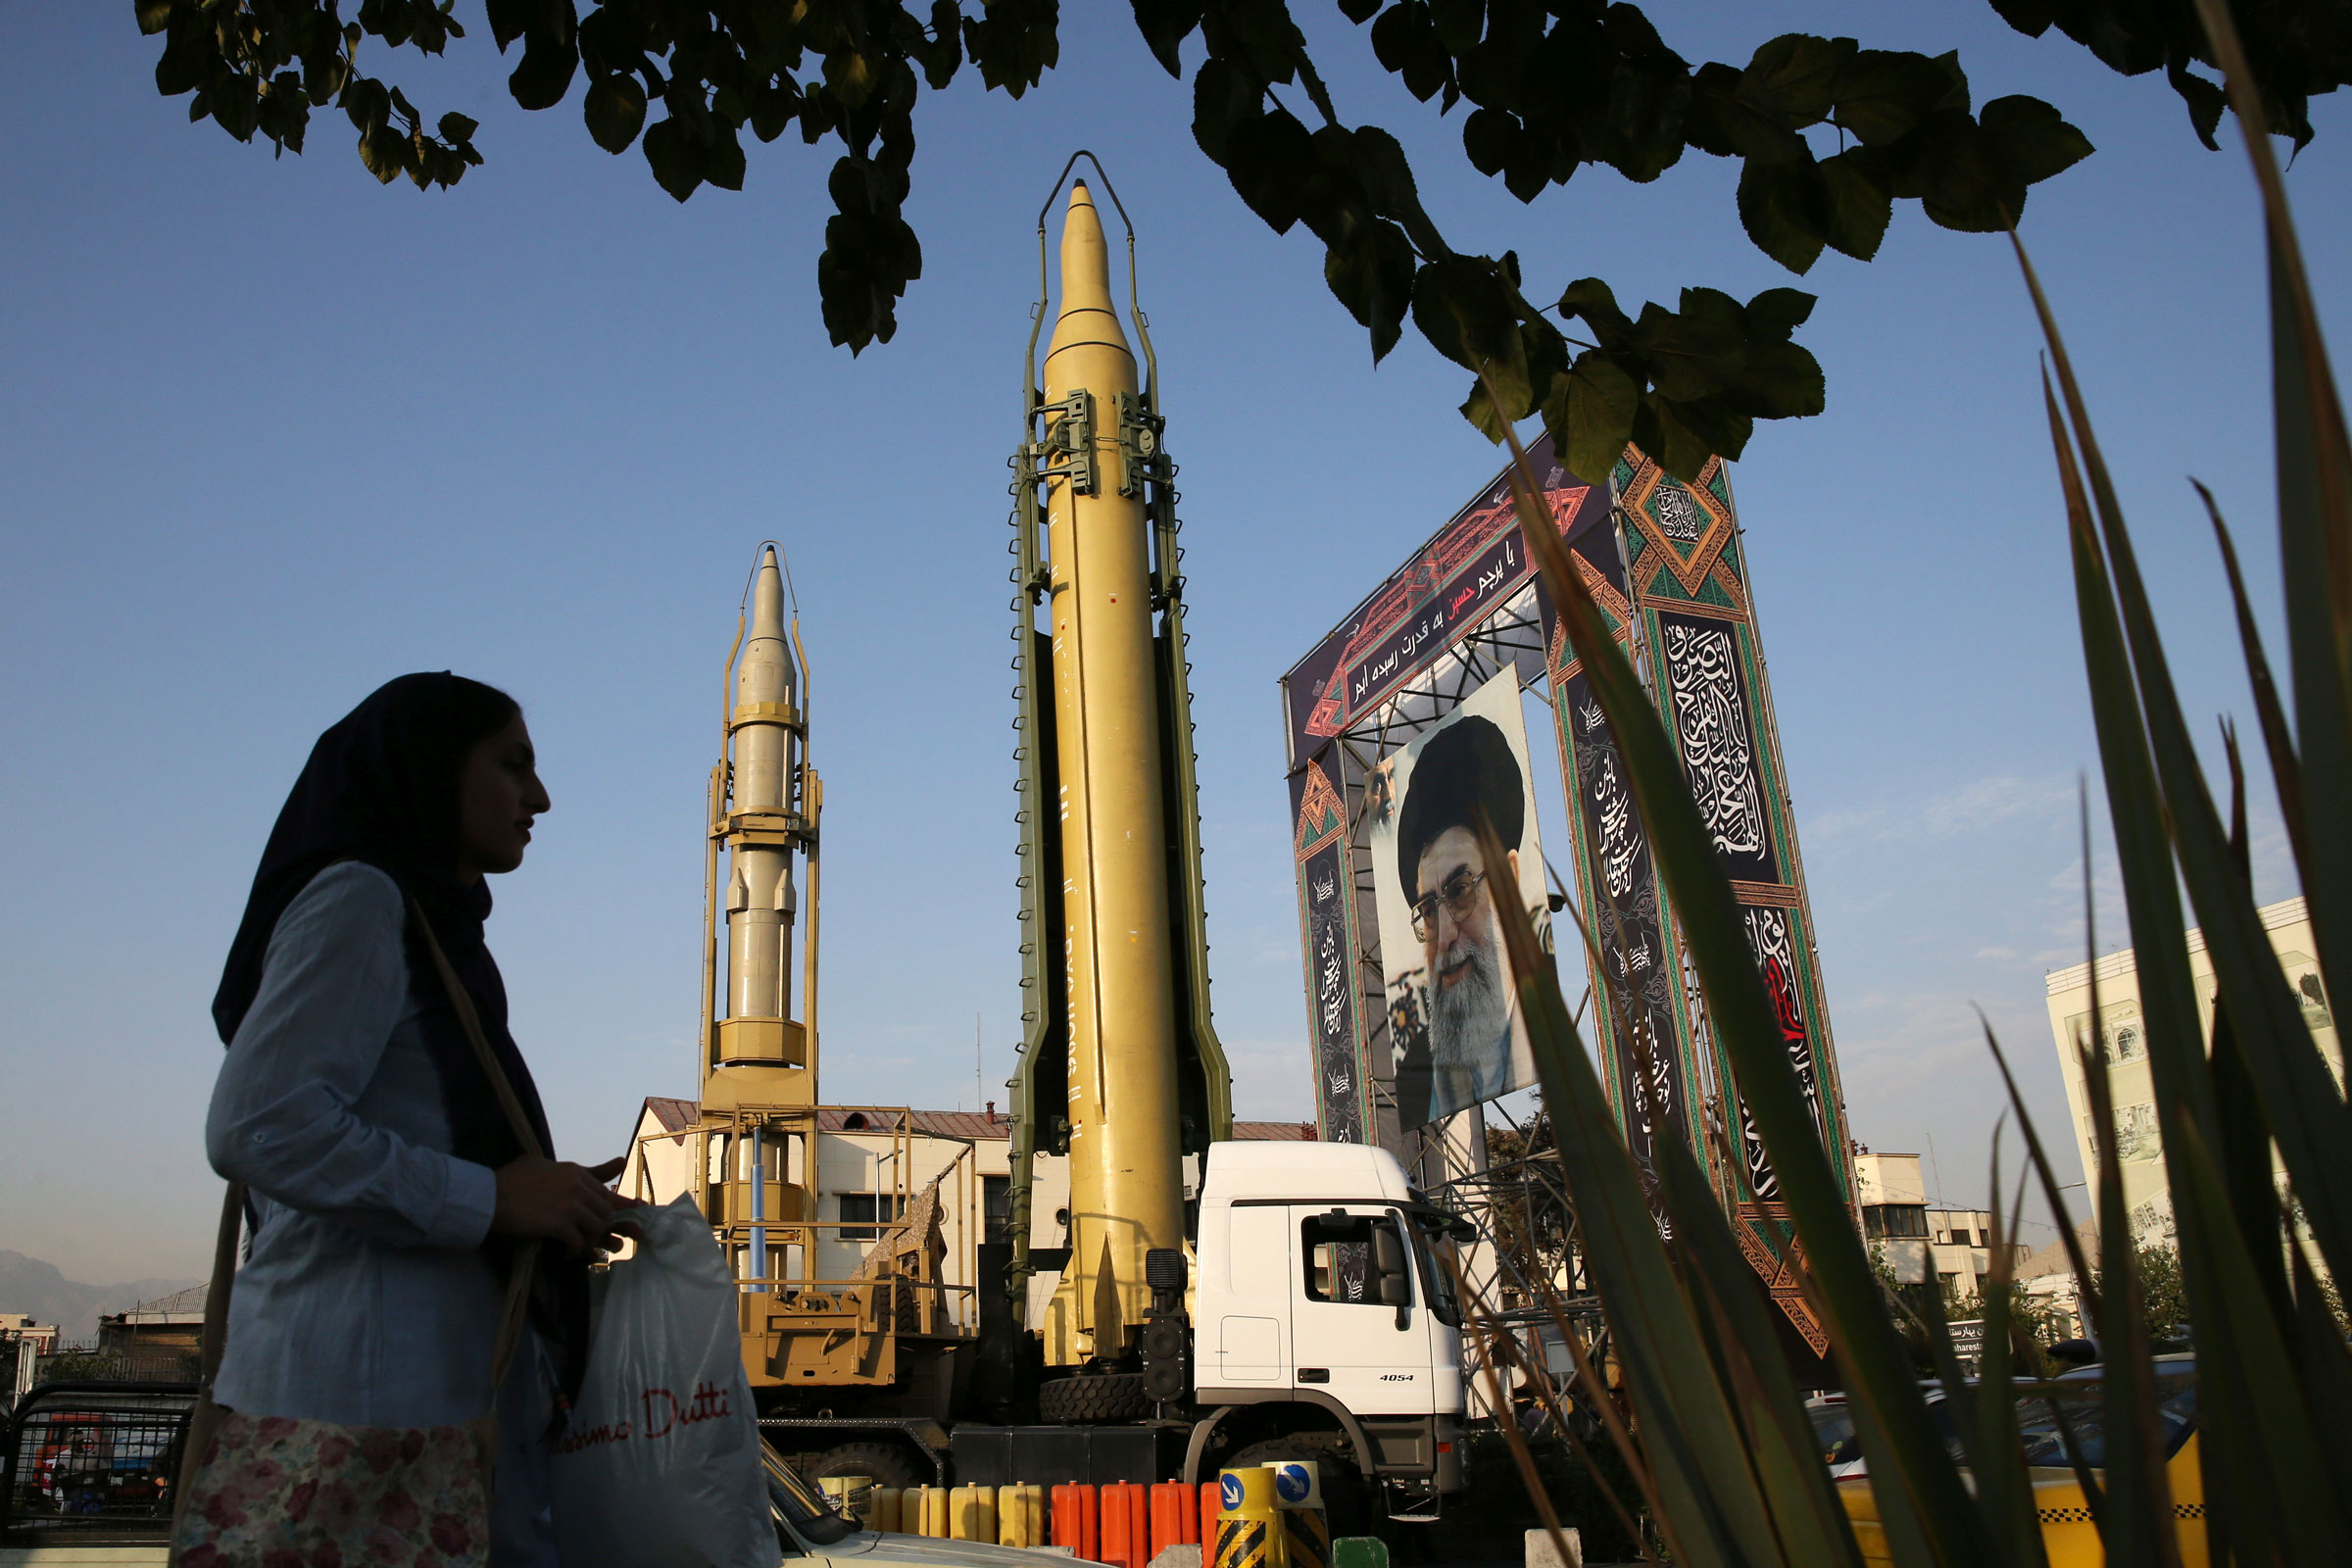 A Ghadr-H missle, center, a solid-fuel surface-to-surface Sejjil missile and a portrait of the Supreme Leader Ayatollah Ali Khamenei are on display for the annual Defense Week, marking the 37th anniversary of the 1980s Iran-Iraq war, at Baharestan Sq. in Tehran, Iran, Sept. 24, 2017. (Vahid Salemi—AP)